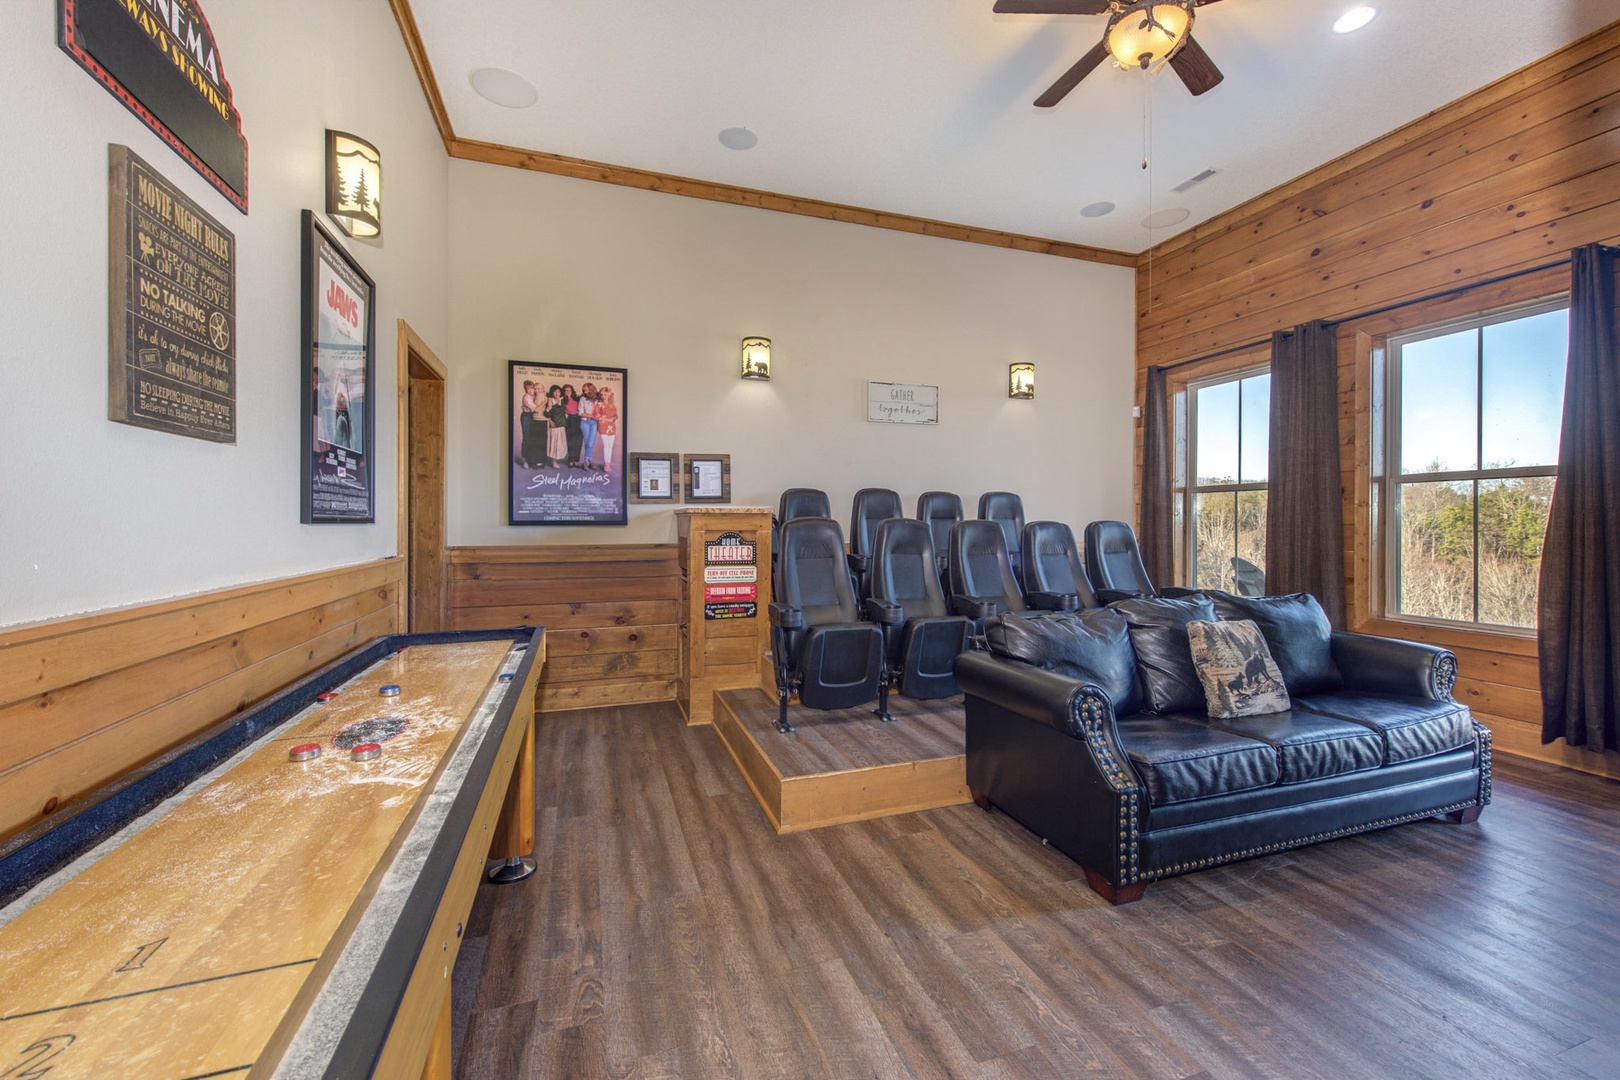 Movie & shuffleboard lovers are sure to love the downstairs theater room!